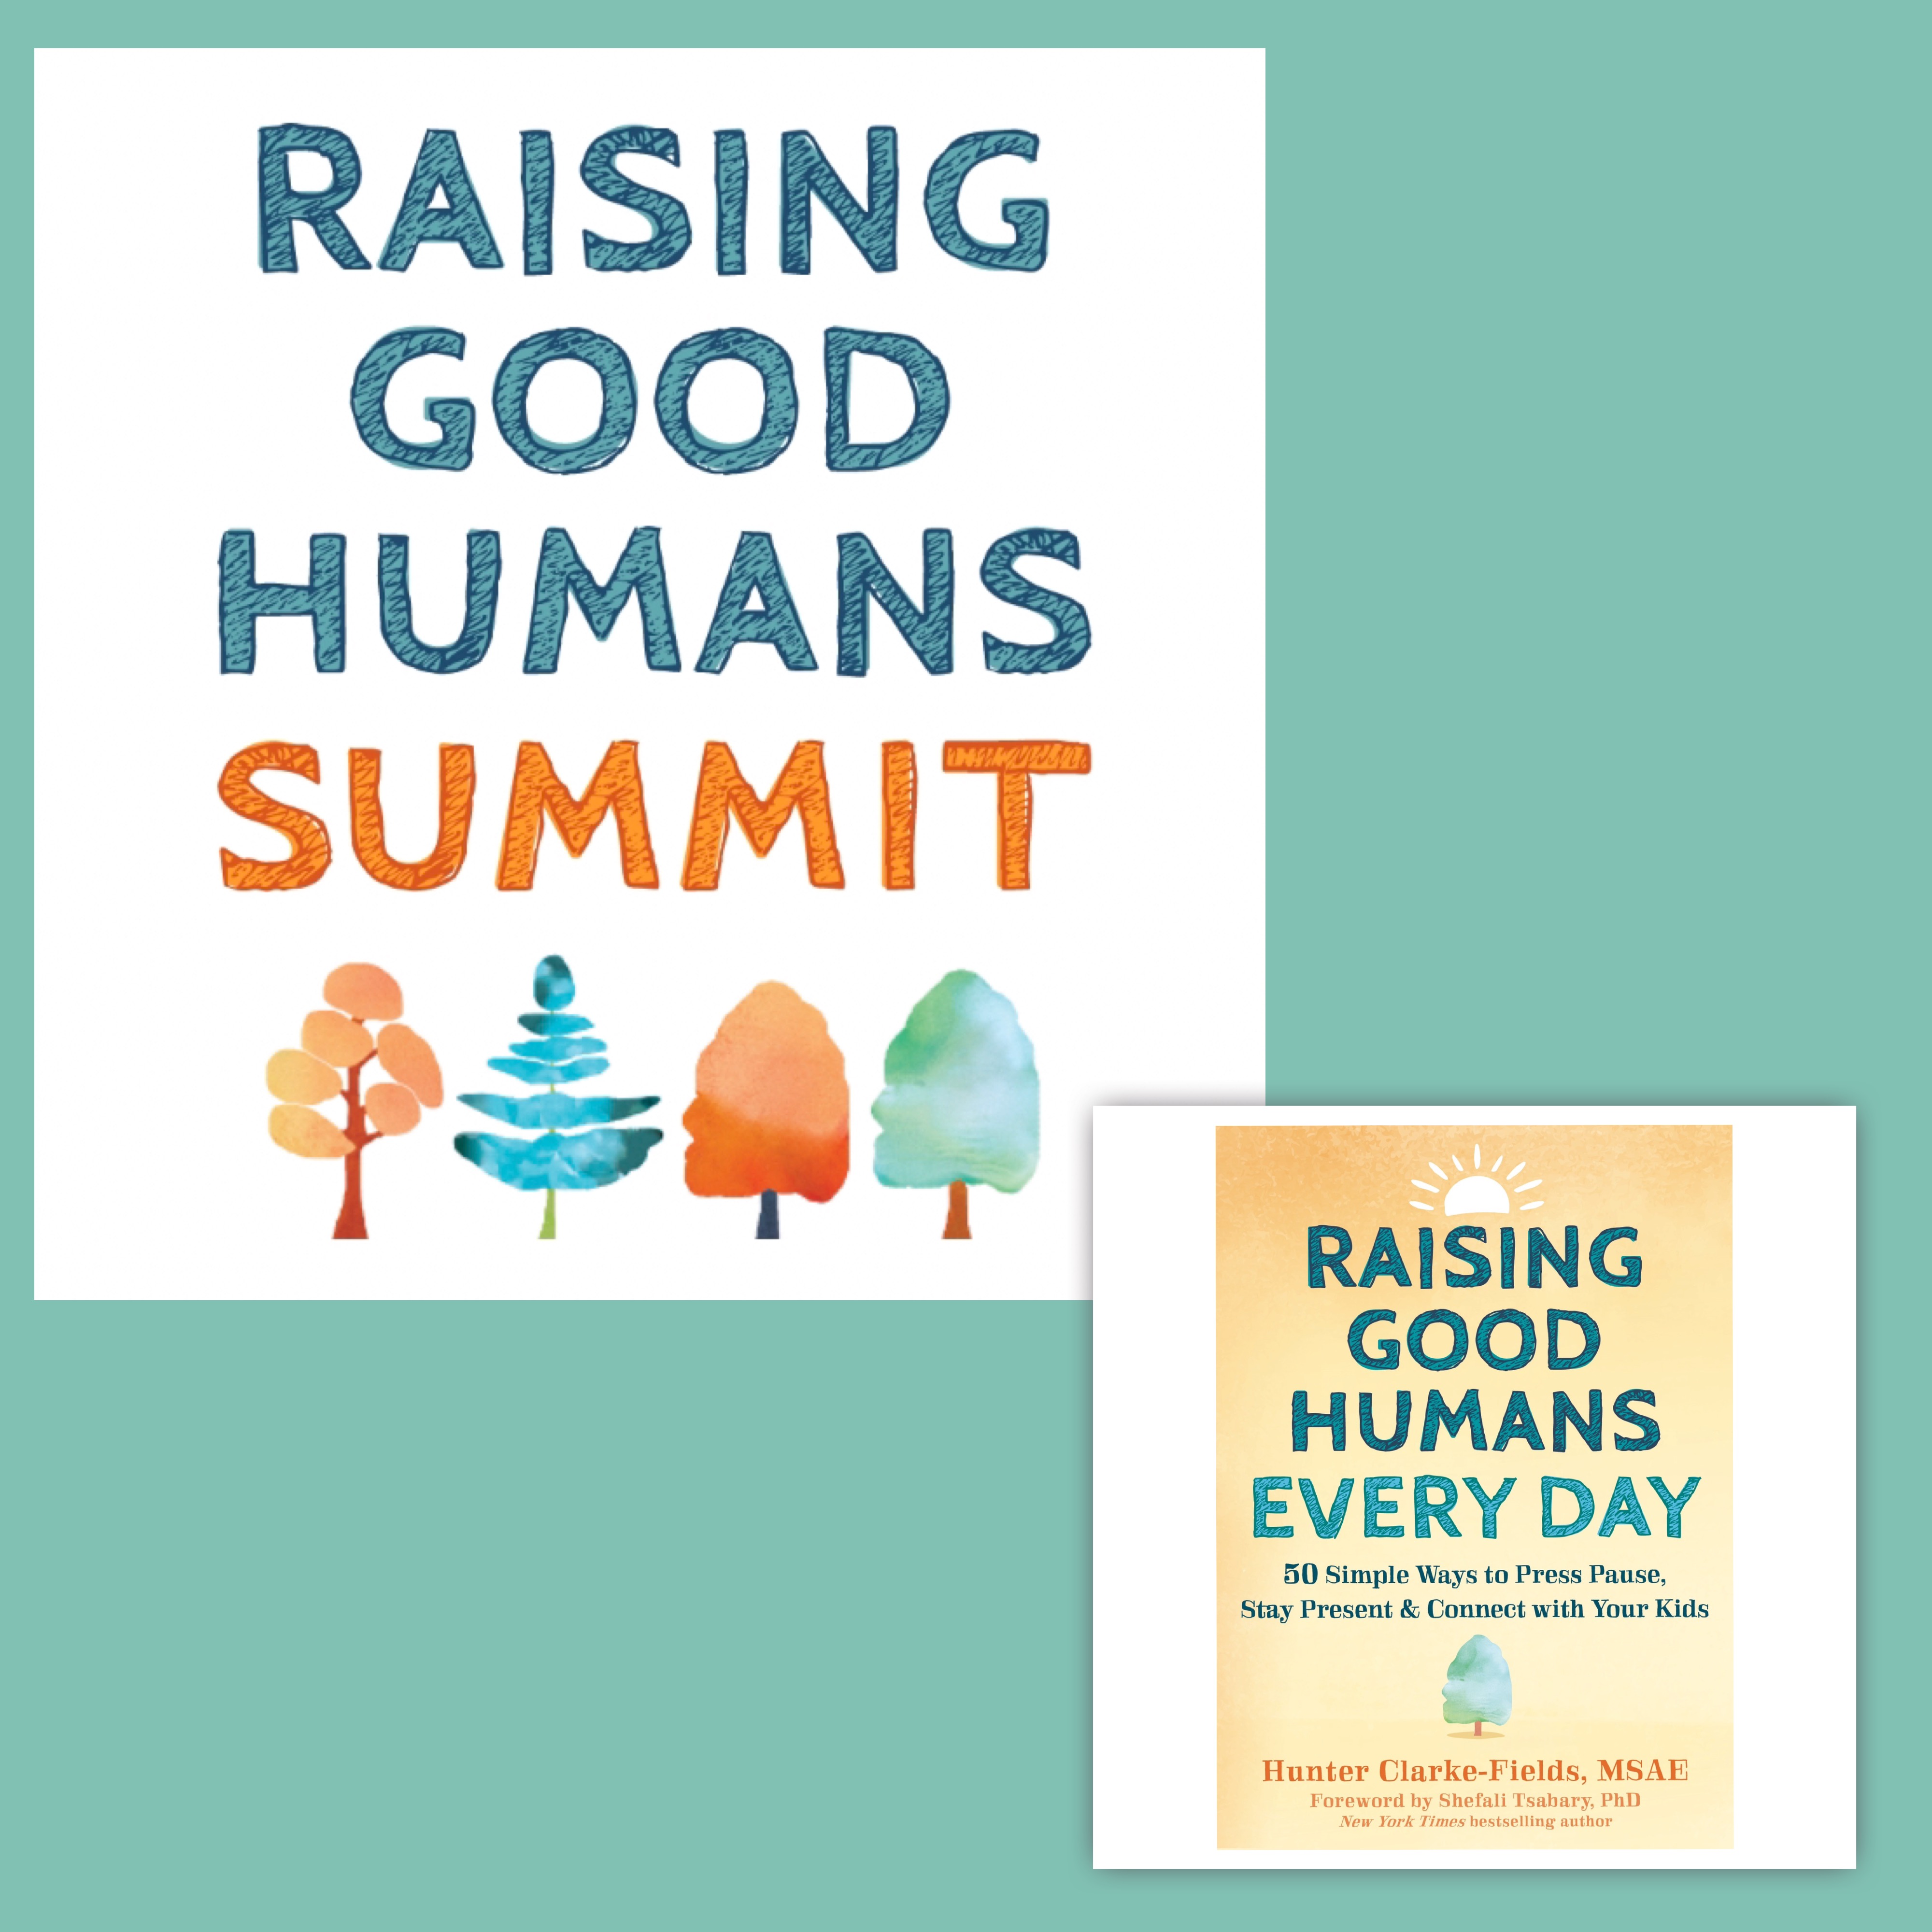 Raising Good Humans Online Summit July 11-14 will be hosted by Mindful Mama Mentor and Author Hunter Clarke-Fields in sync with her new book launch for "Raising Good Humans Every Day".